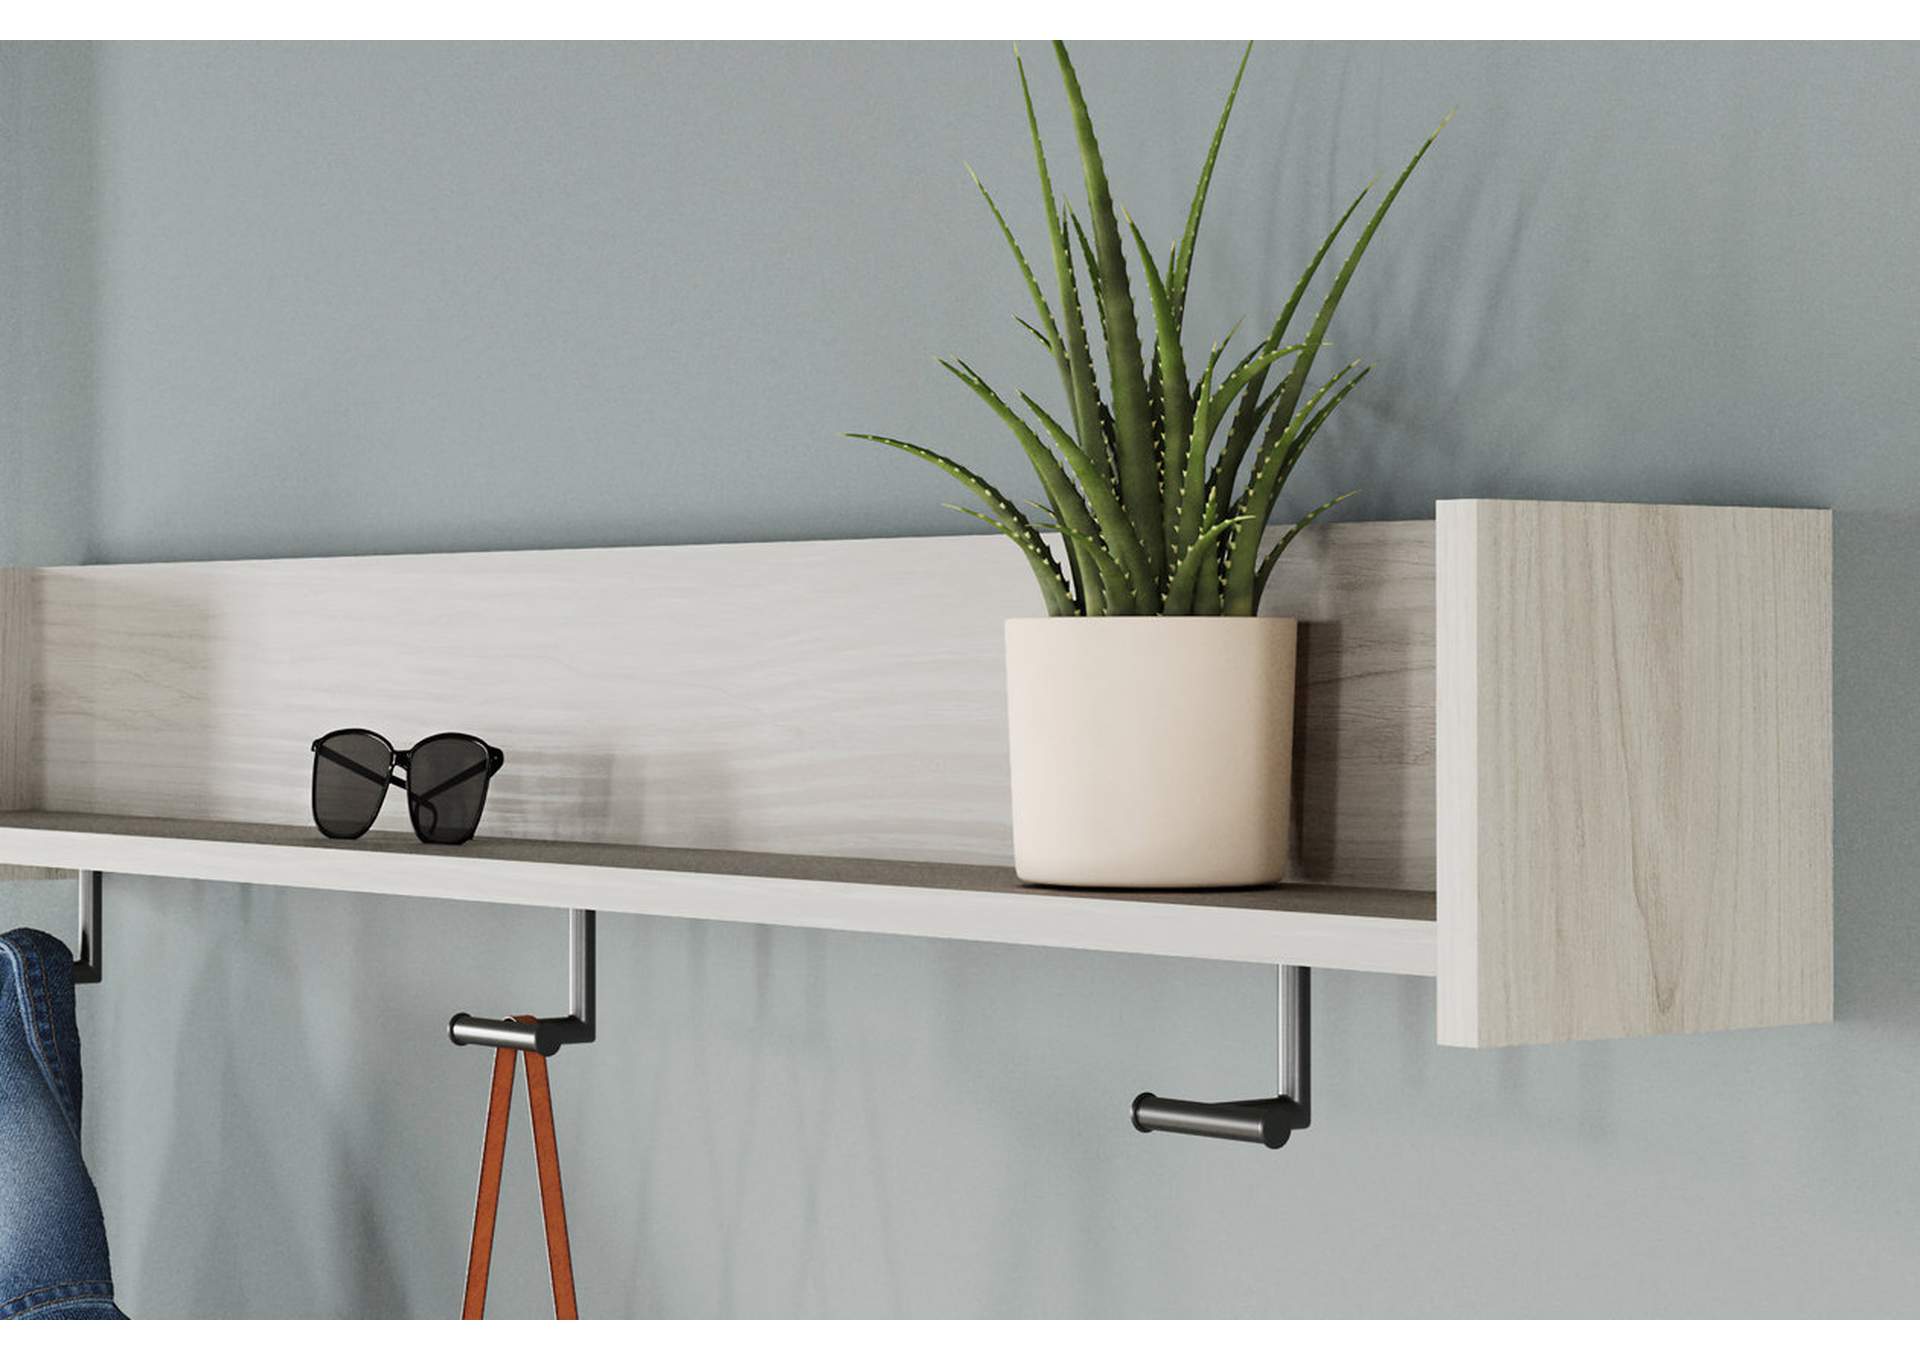 Socalle Bench with Coat Rack,Signature Design By Ashley